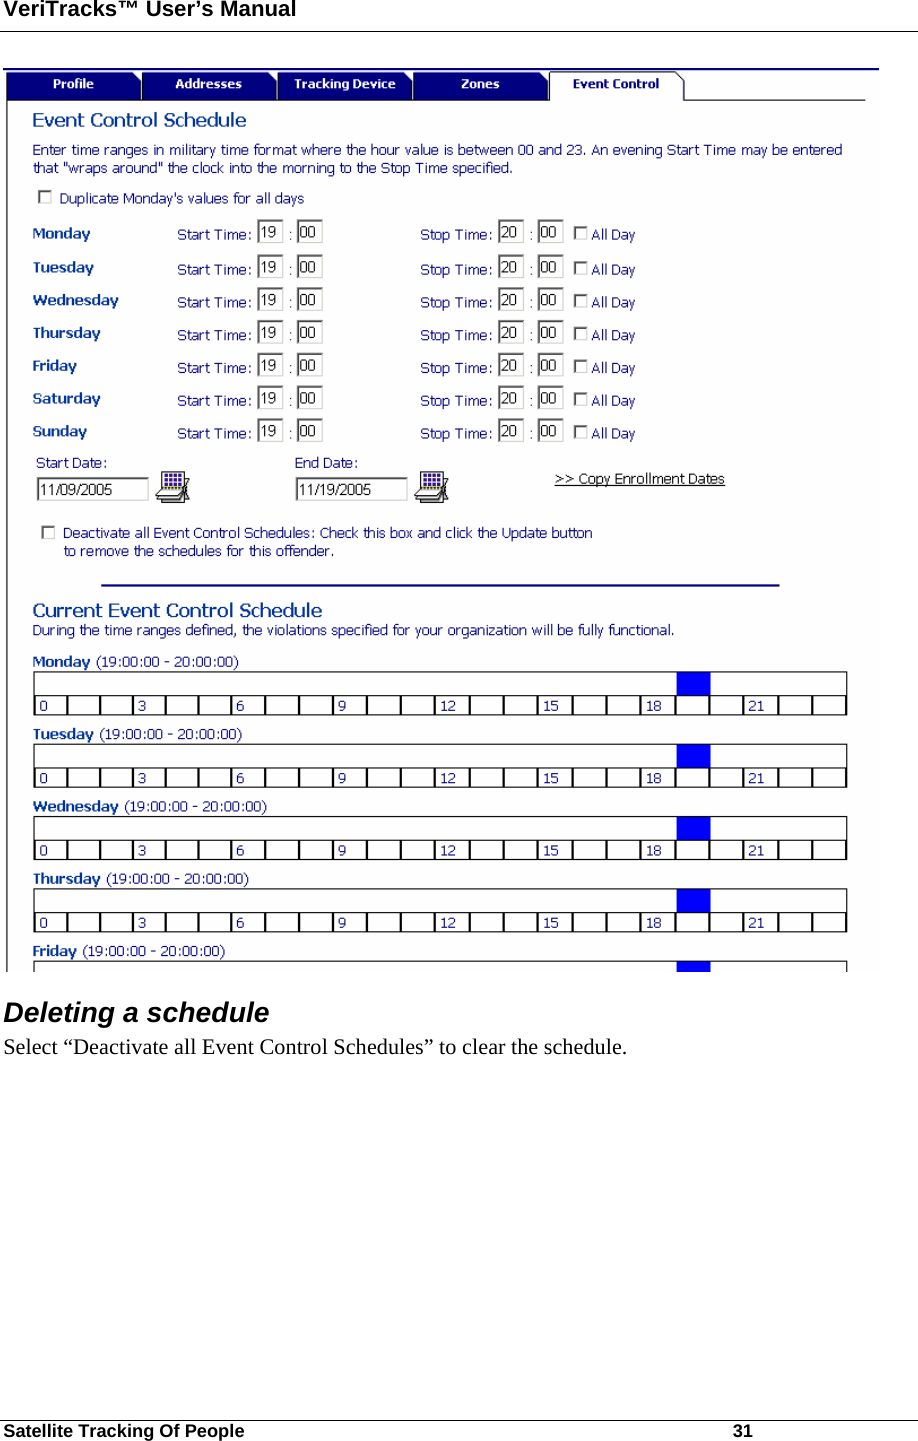 VeriTracks™ User’s Manual Satellite Tracking Of People       31  Deleting a schedule Select “Deactivate all Event Control Schedules” to clear the schedule.    